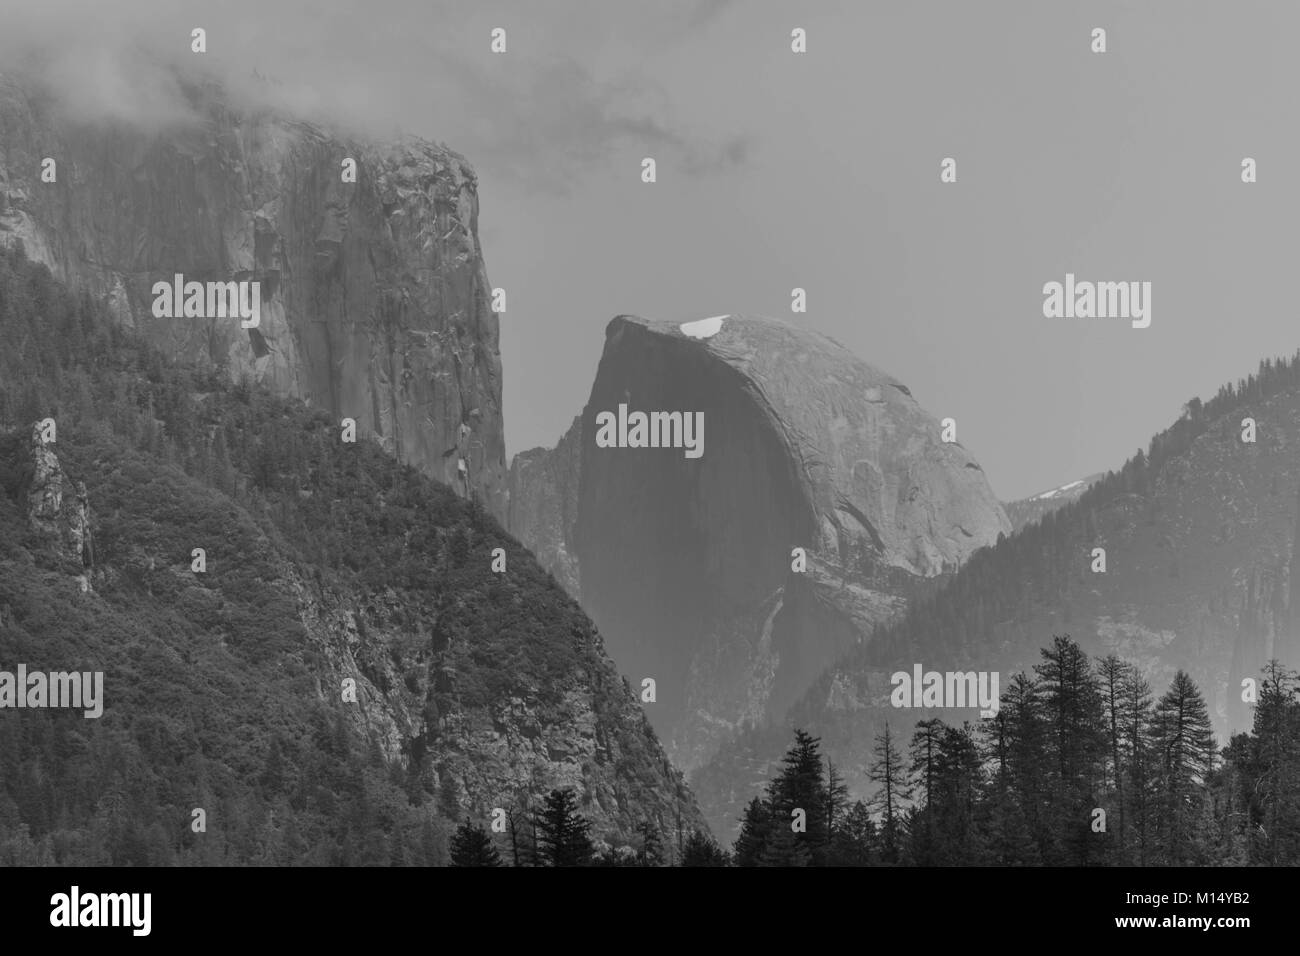 Black and white shot of half dome with a spot of snow at the top, surrounding mountains, with pine trees in the foreground, in Yosemite National Park Stock Photo